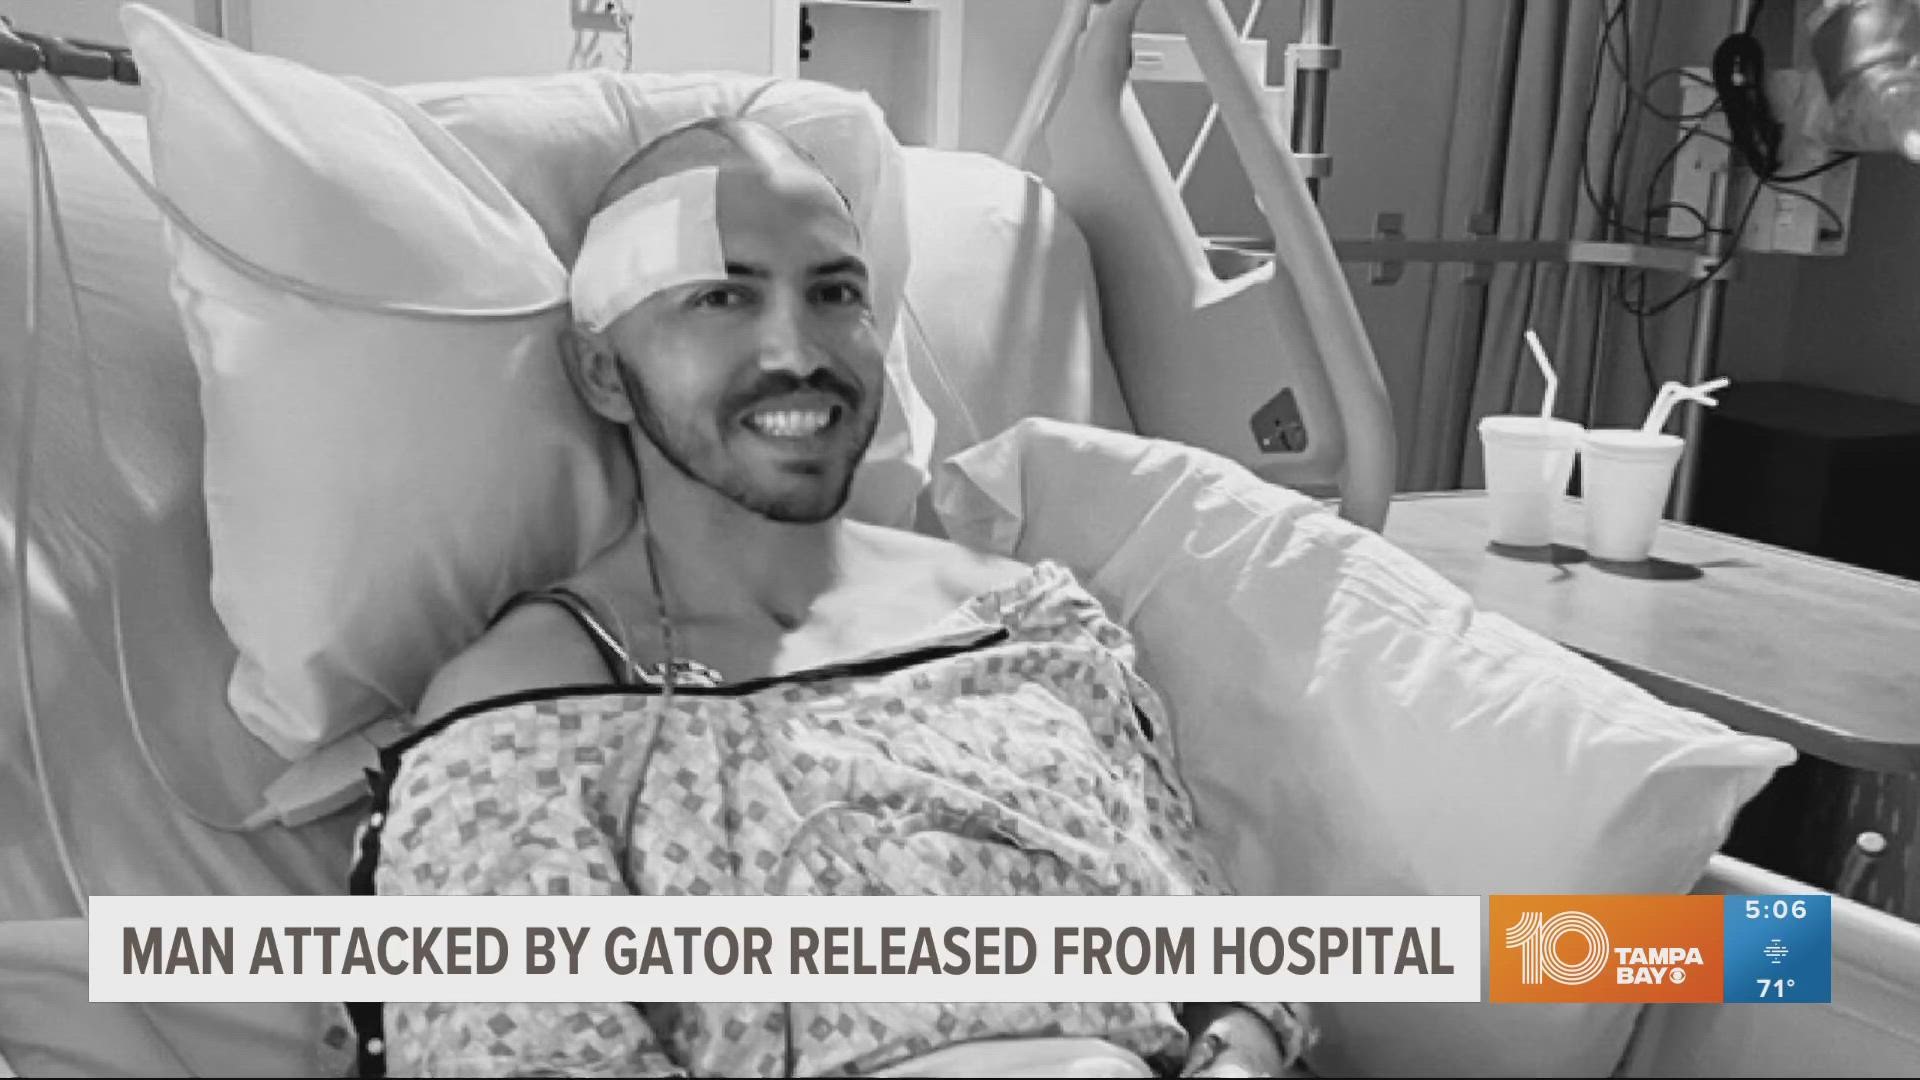 After surviving an attack that could have taken his life, the road to recovery has been another battle J.C. LaVerde is facing head-on.